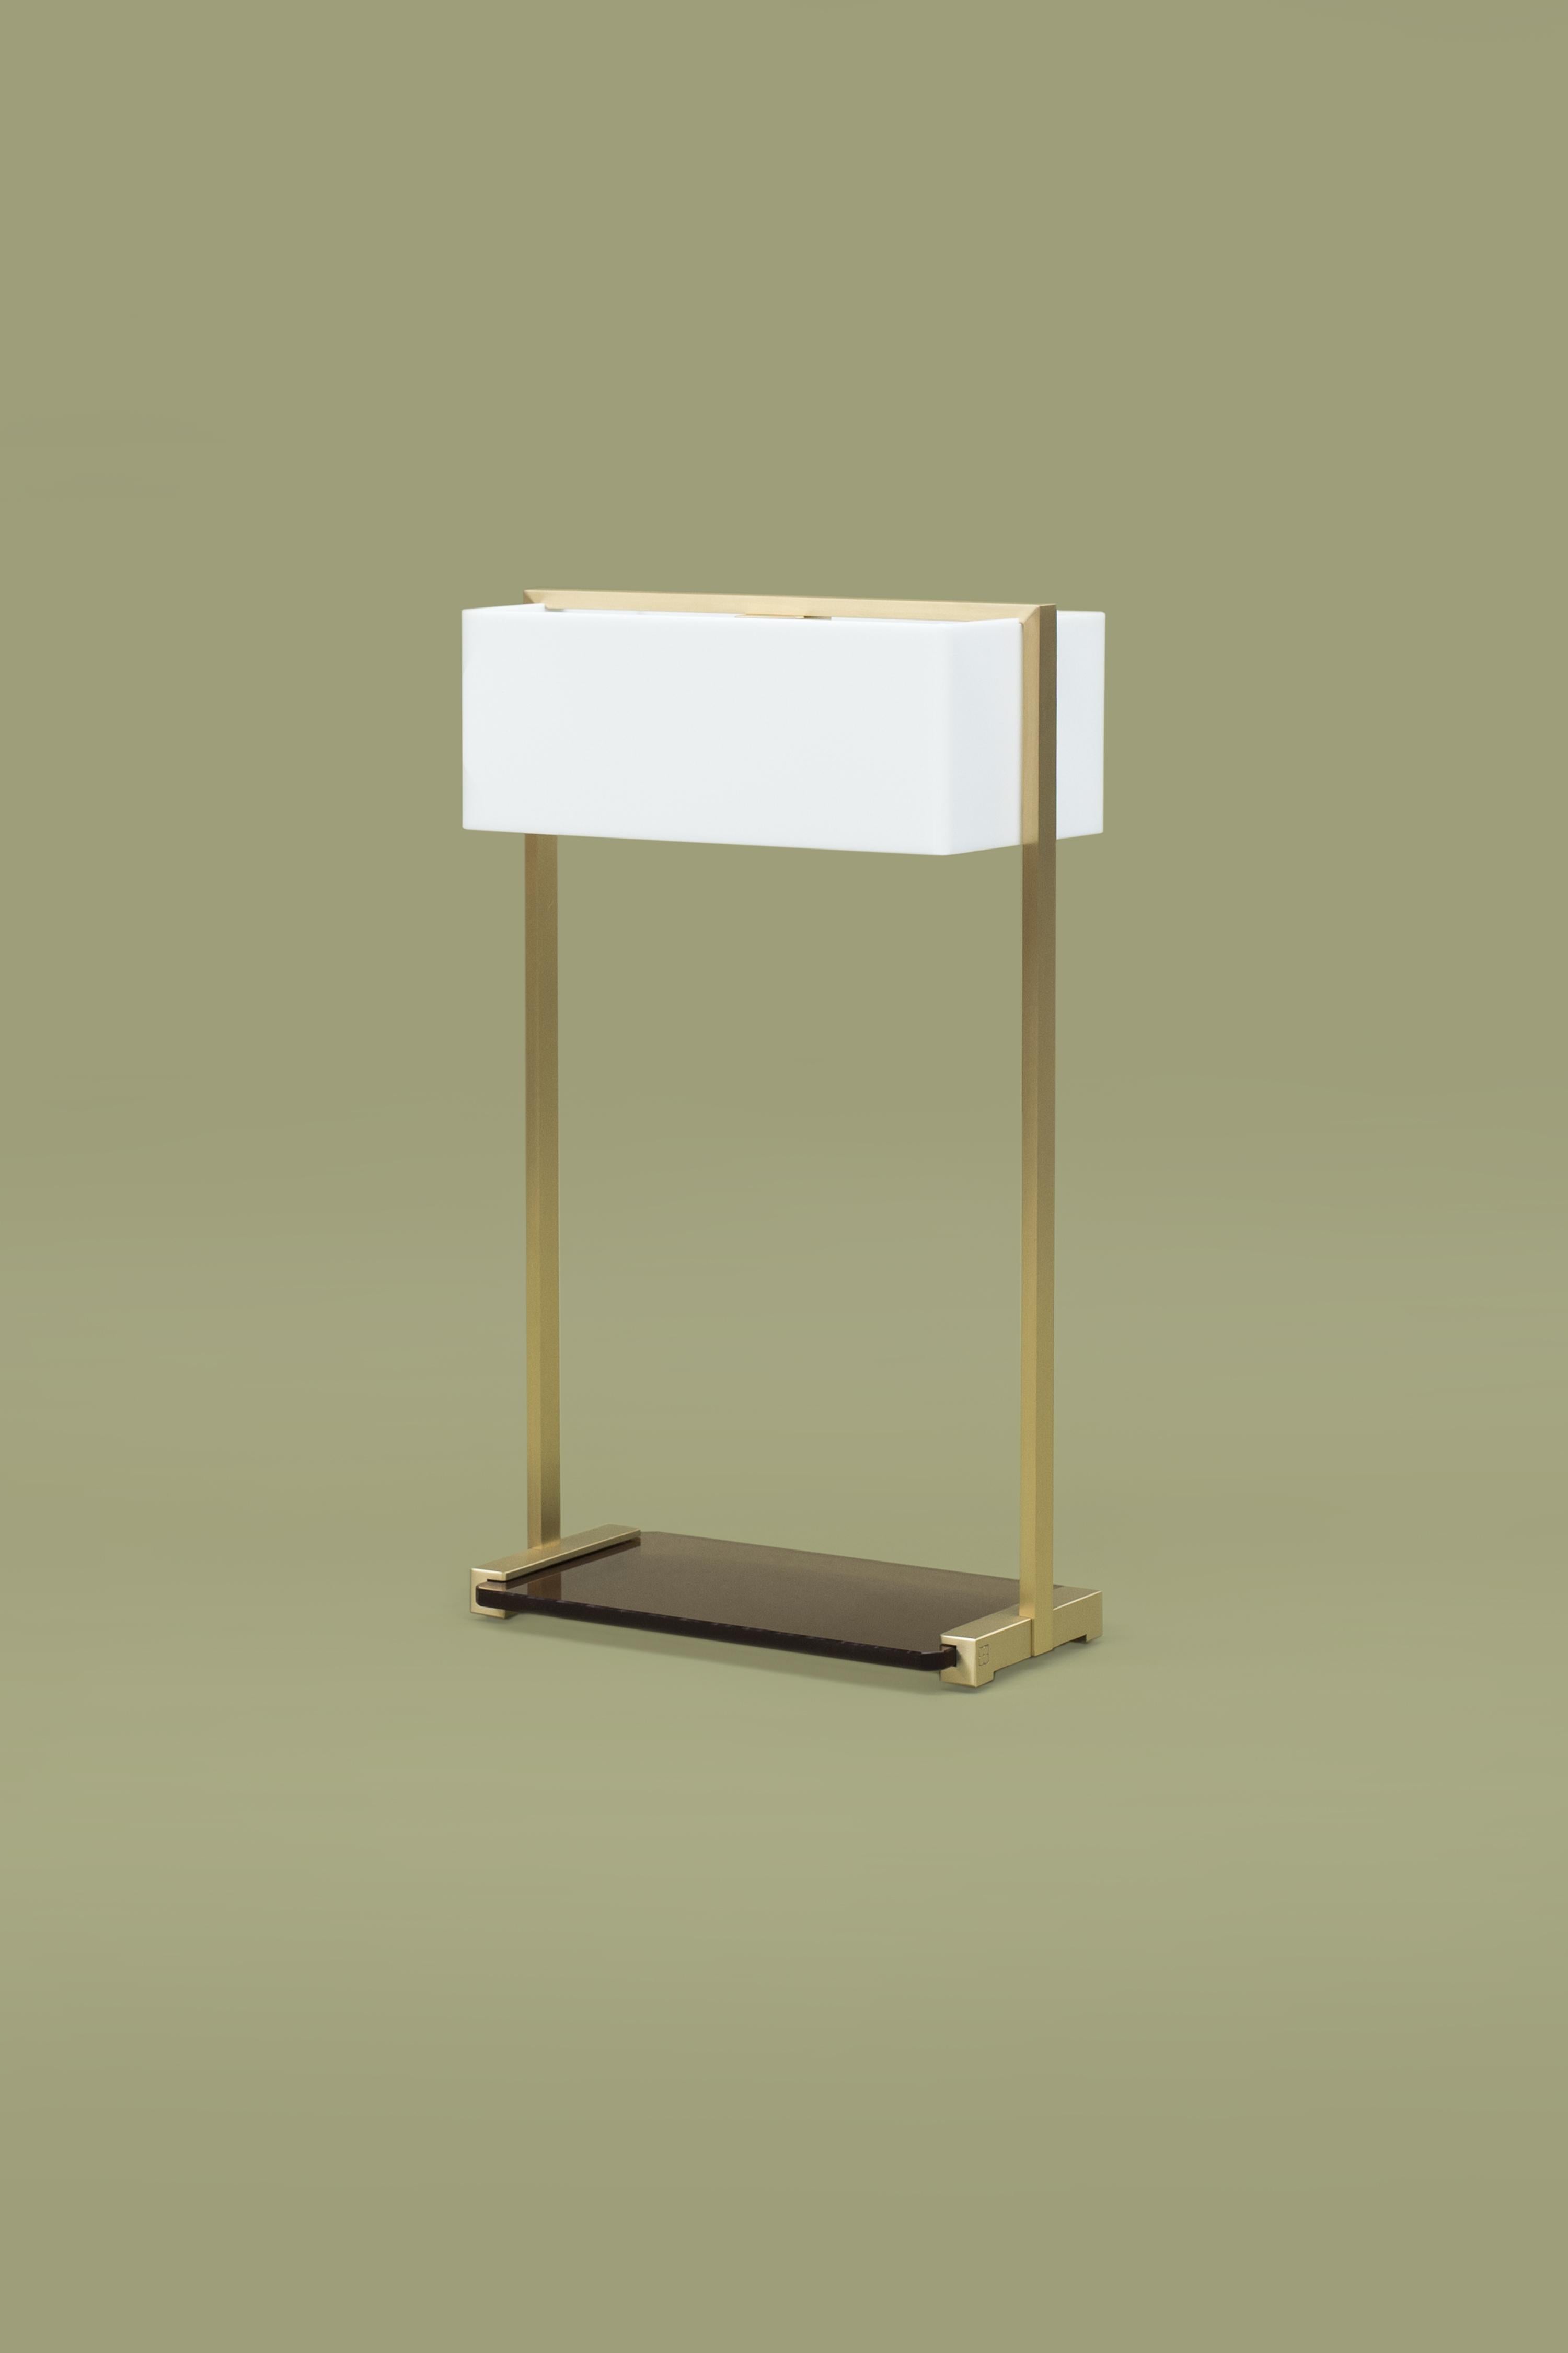 This 21st century minimalist Tom MW10 table lamp was designed by Peter Ghyczy in 2006 and hand-crafted in the GHYCYZ atelier in the south of the Netherlands, with a select group of artisans. The brass frame, with a smooth matte finish, is made of 1